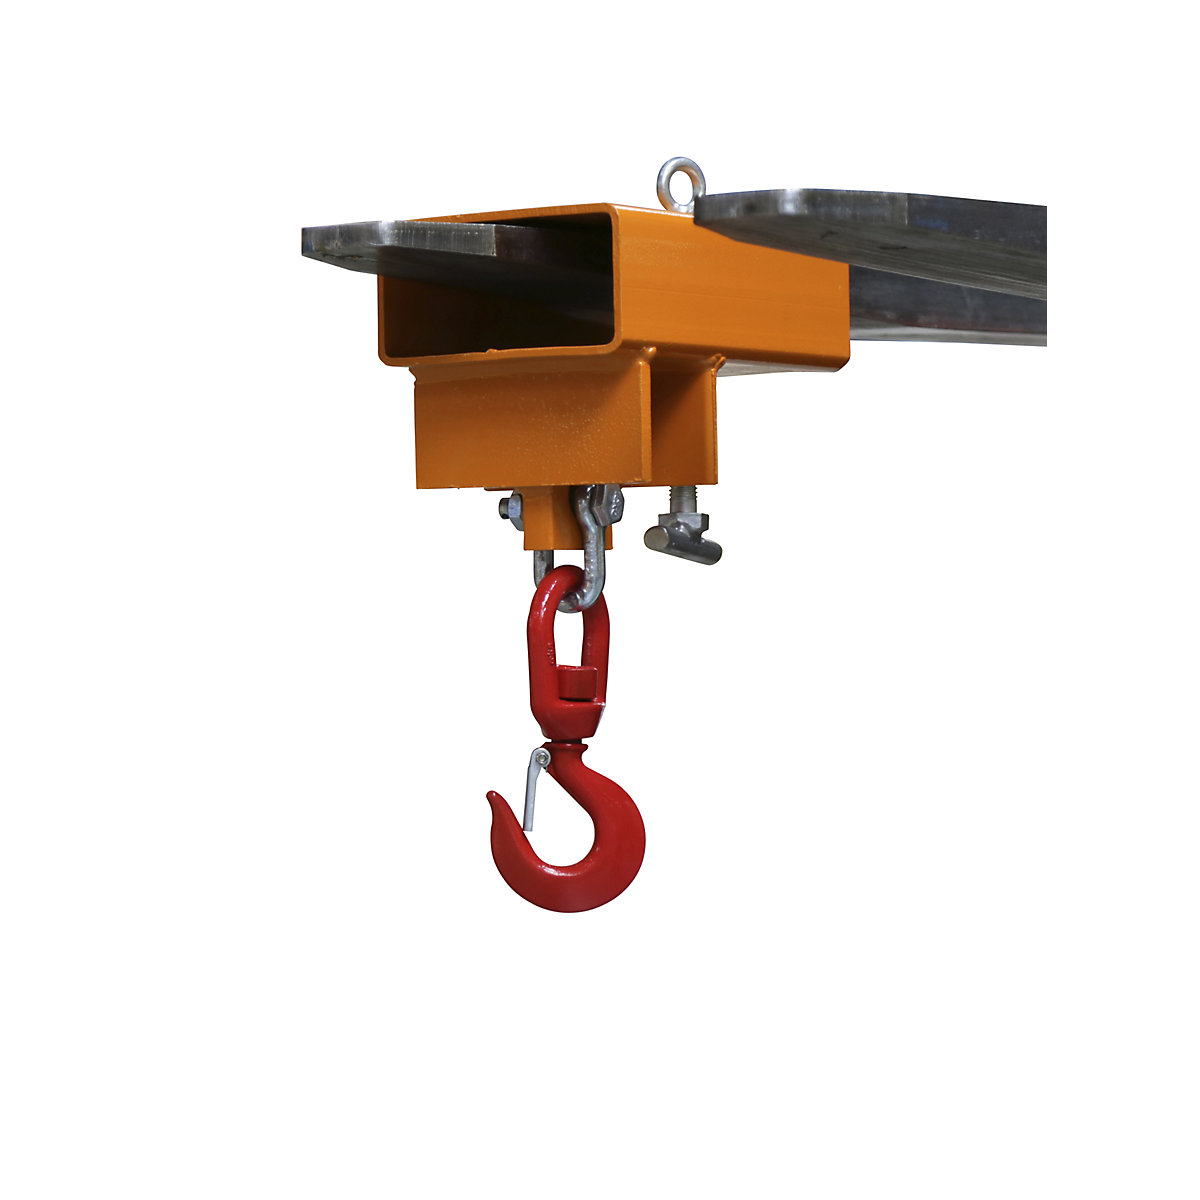 Load hook for 1 fork tip, max. load 2.5 t, painted, yellow orange RAL 2000